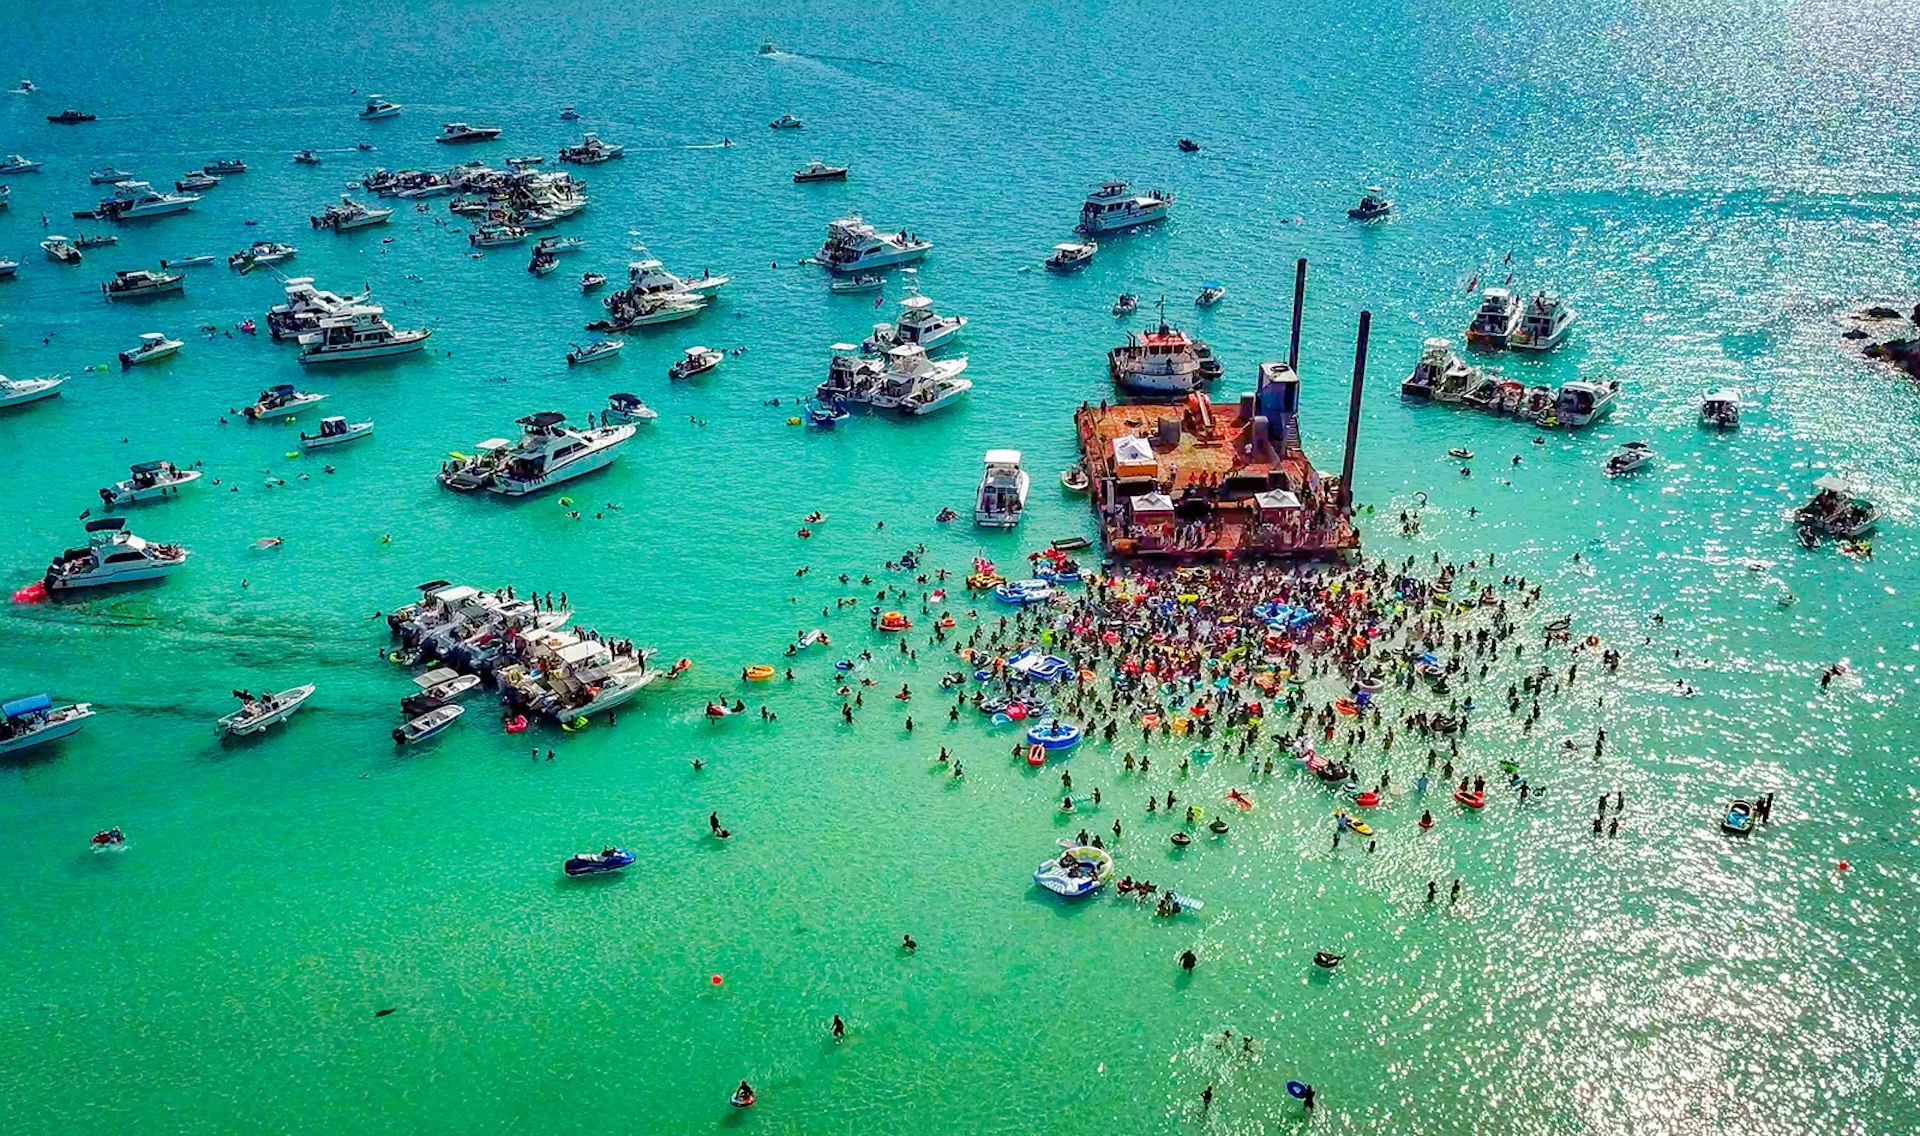 An aerial shot of boats and people in the water surrounding a large wooden raft